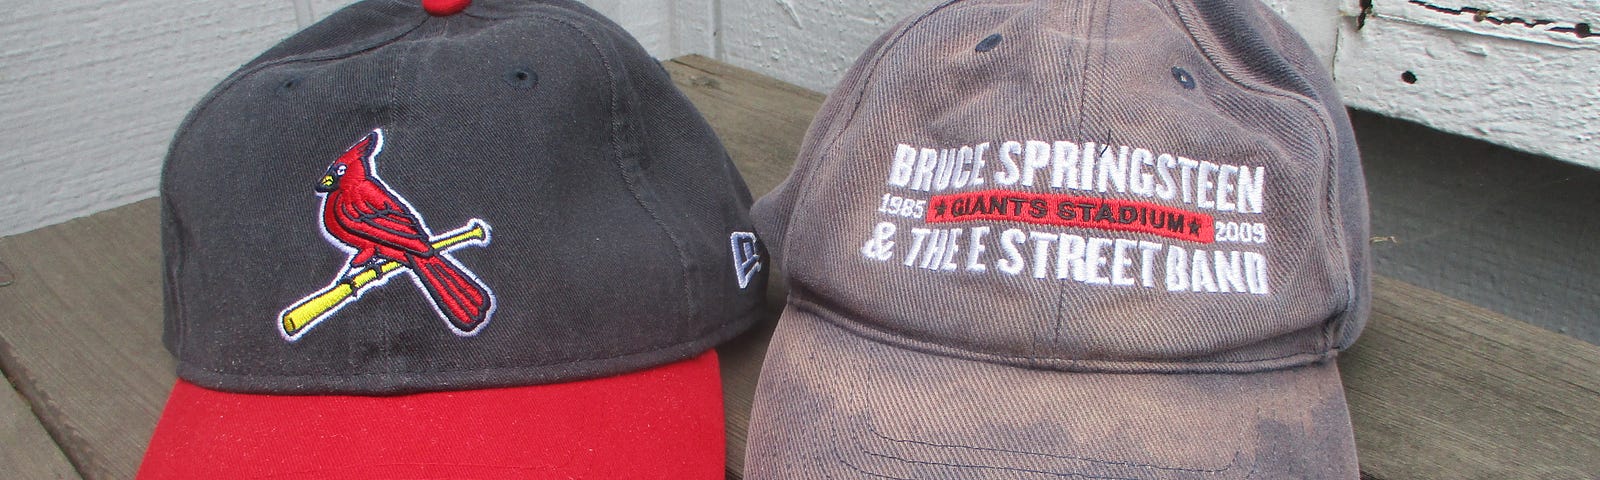 Two hats, one for social events and one specifically for exercising